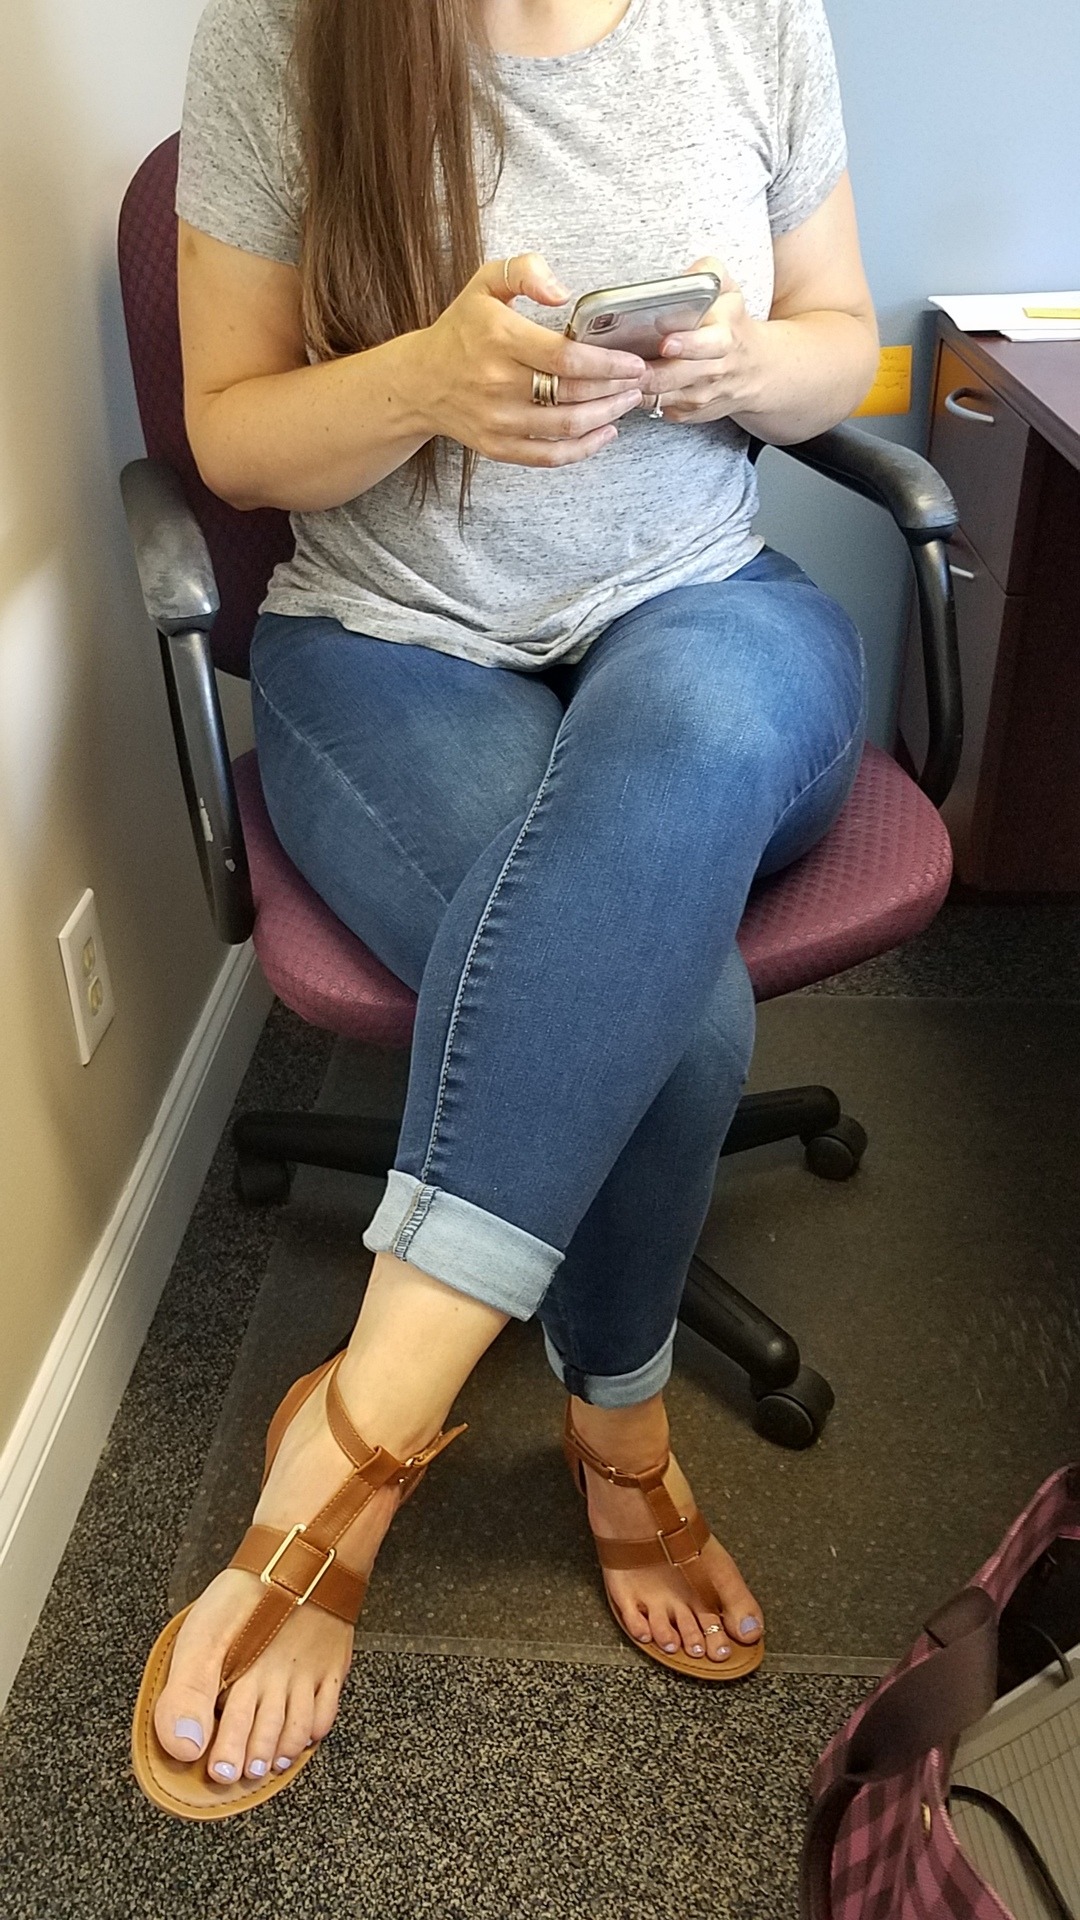 Candid,homemade and all original pics — My pretty wife looking sexy at work.please comment